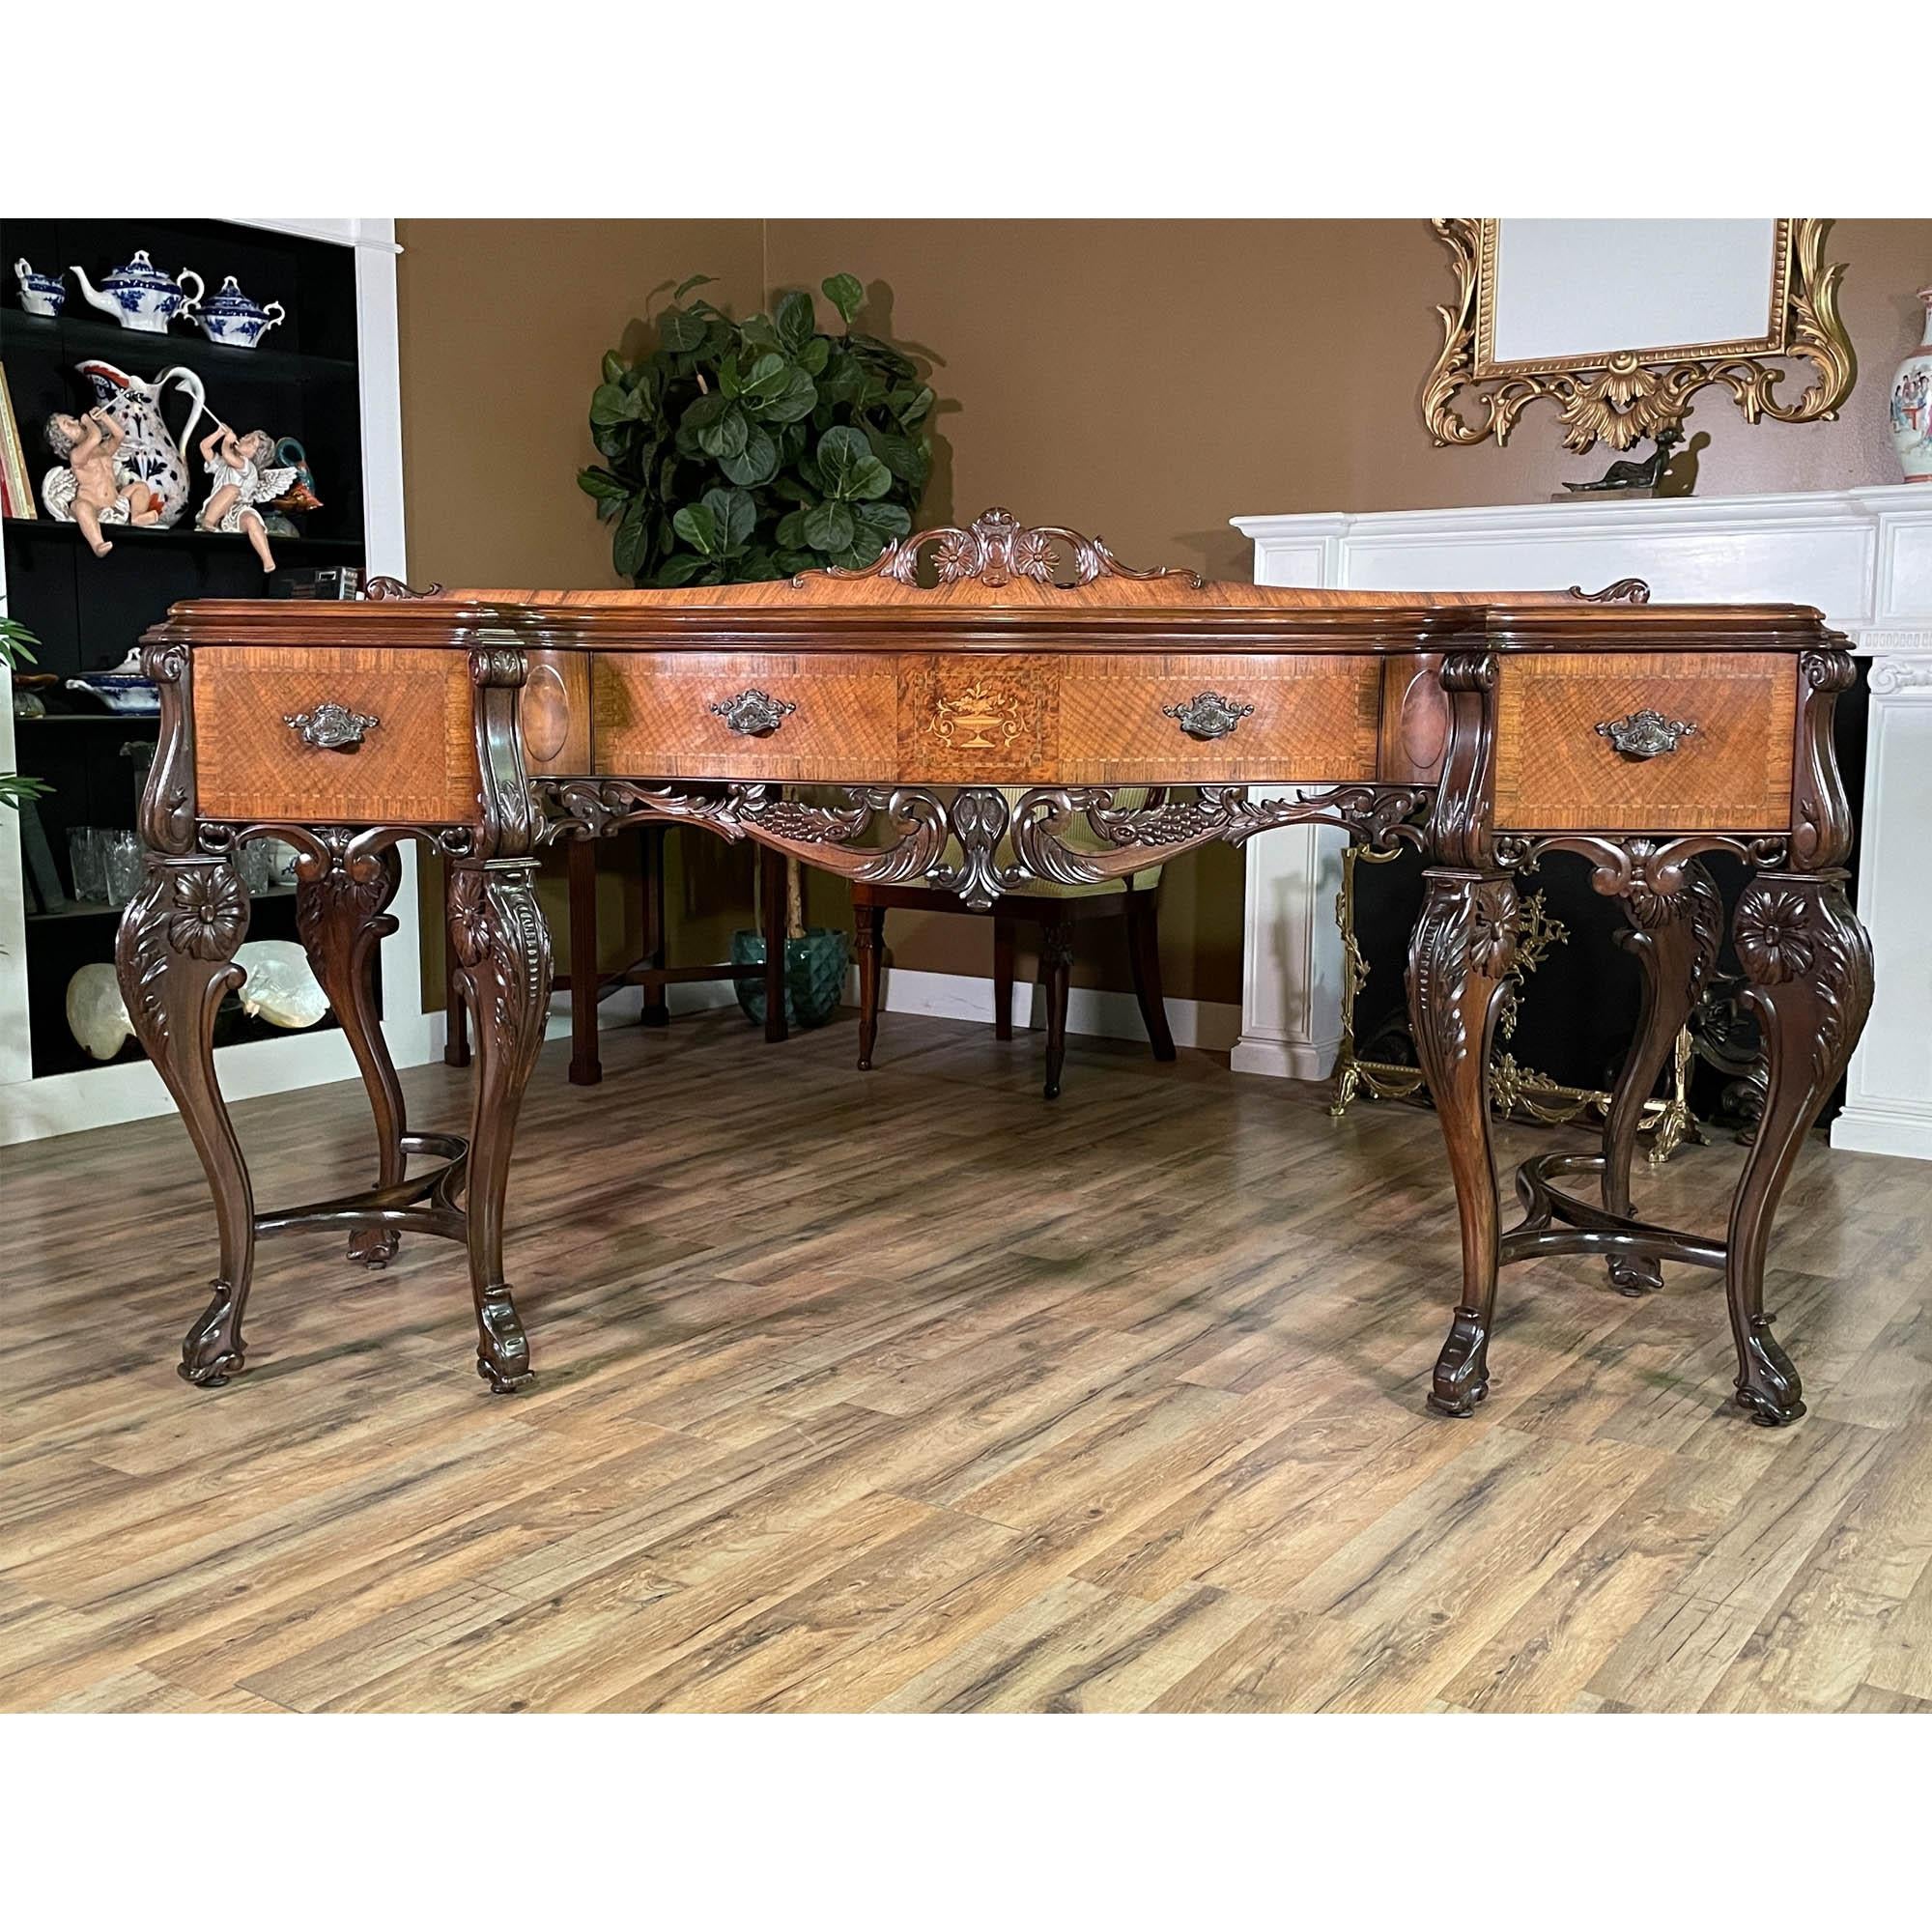 Antique Walnut Inlaid Sideboard In Good Condition For Sale In Annville, PA